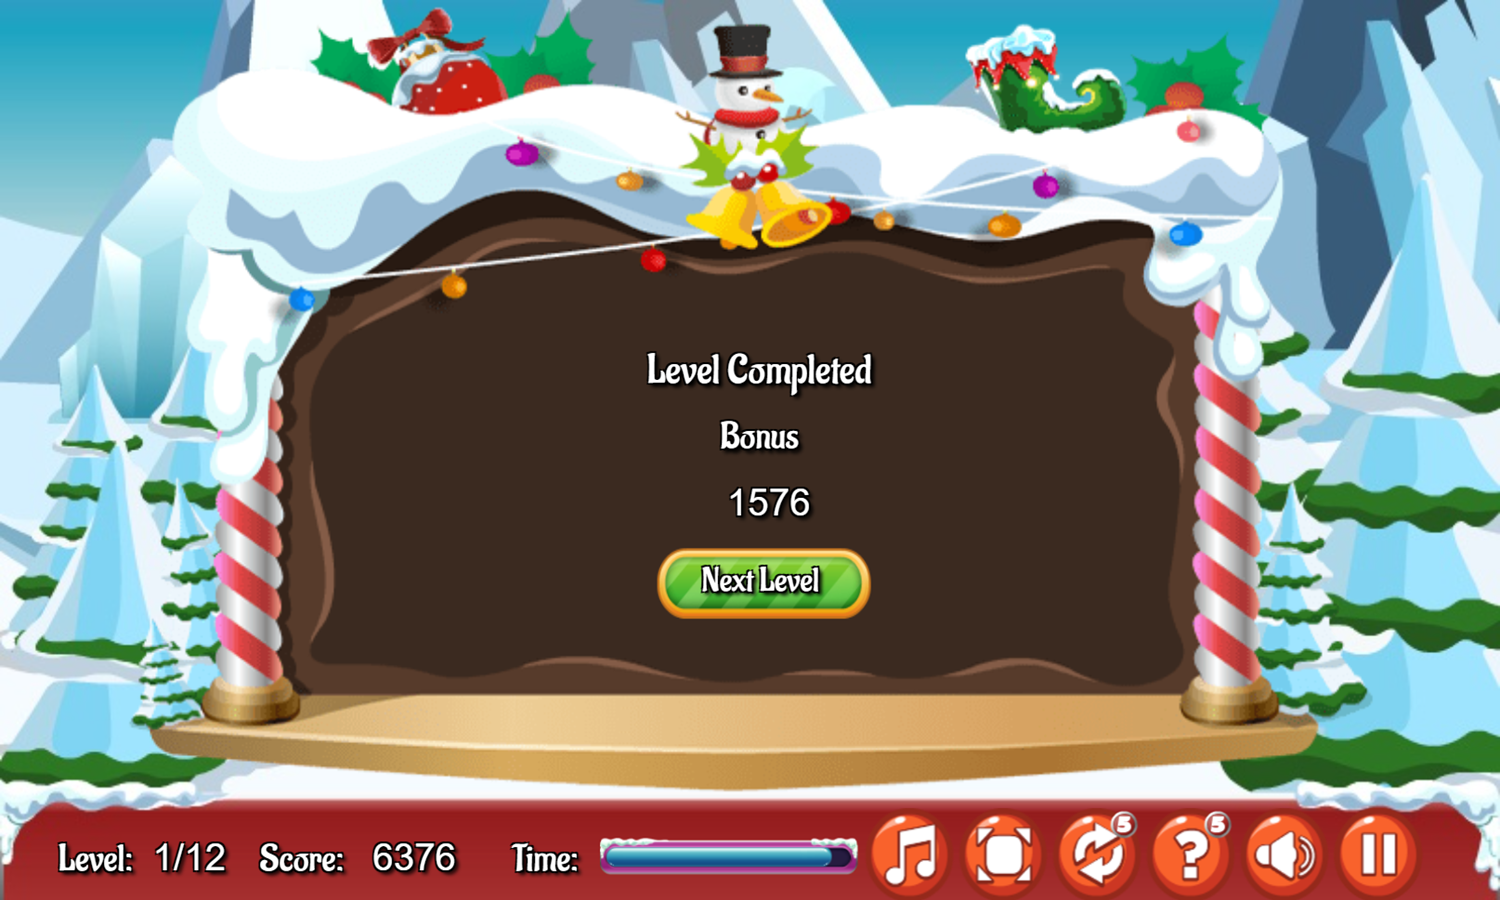 Xmas Card Connect Game Level Completed Screenshot.